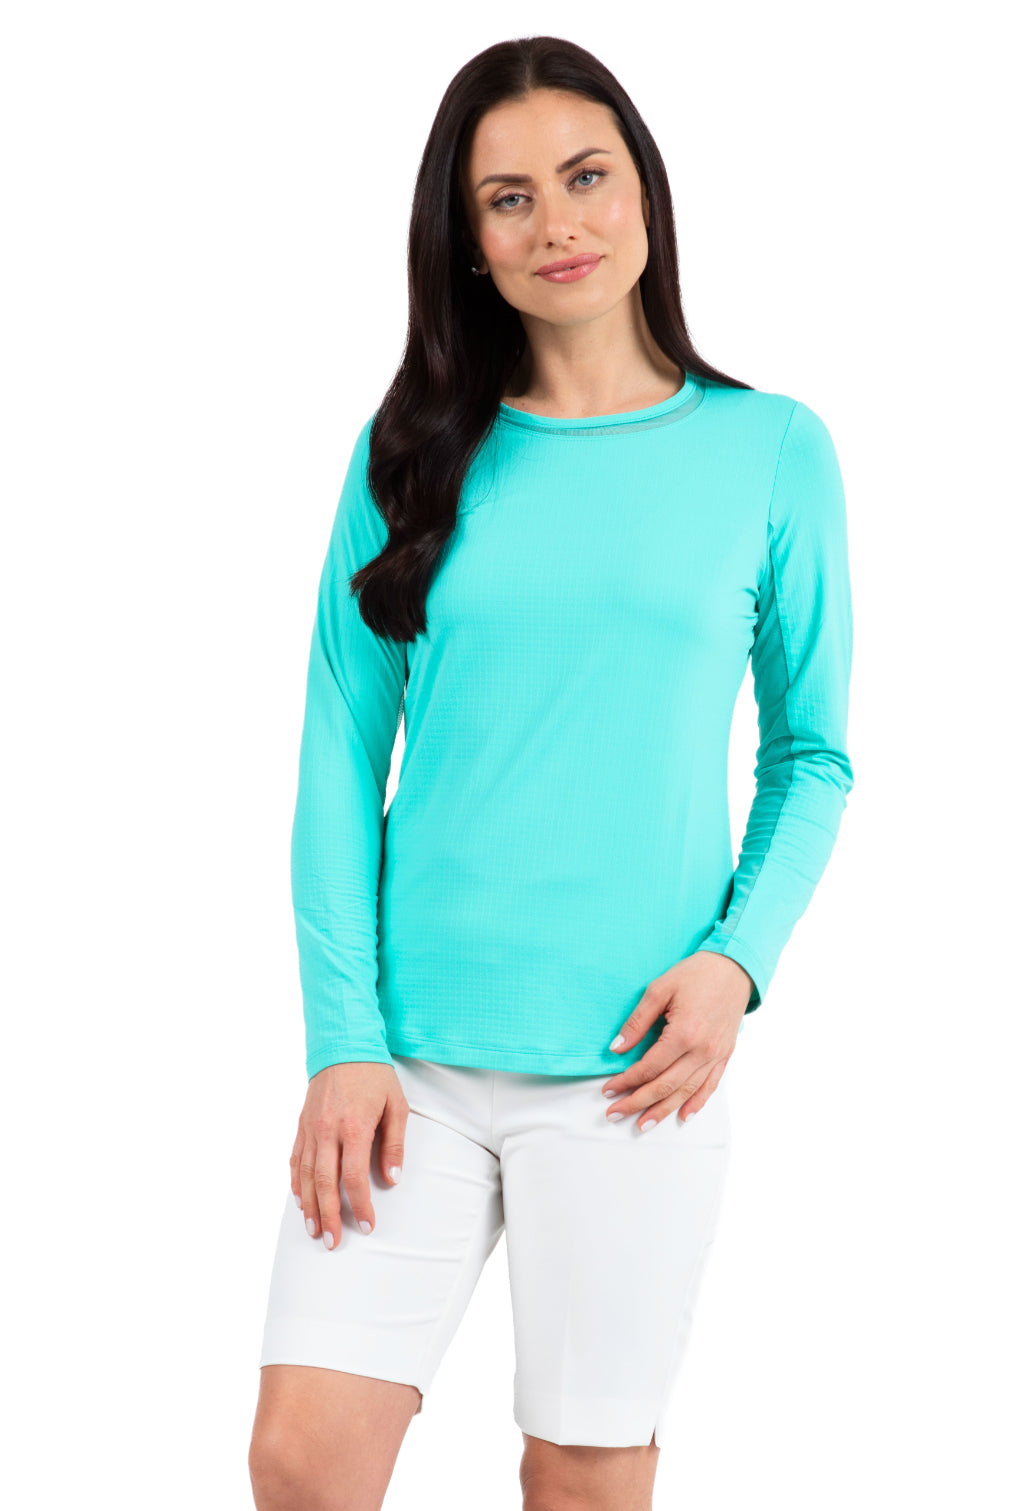 Long Sleeve Crew Neck with Mesh - 83000